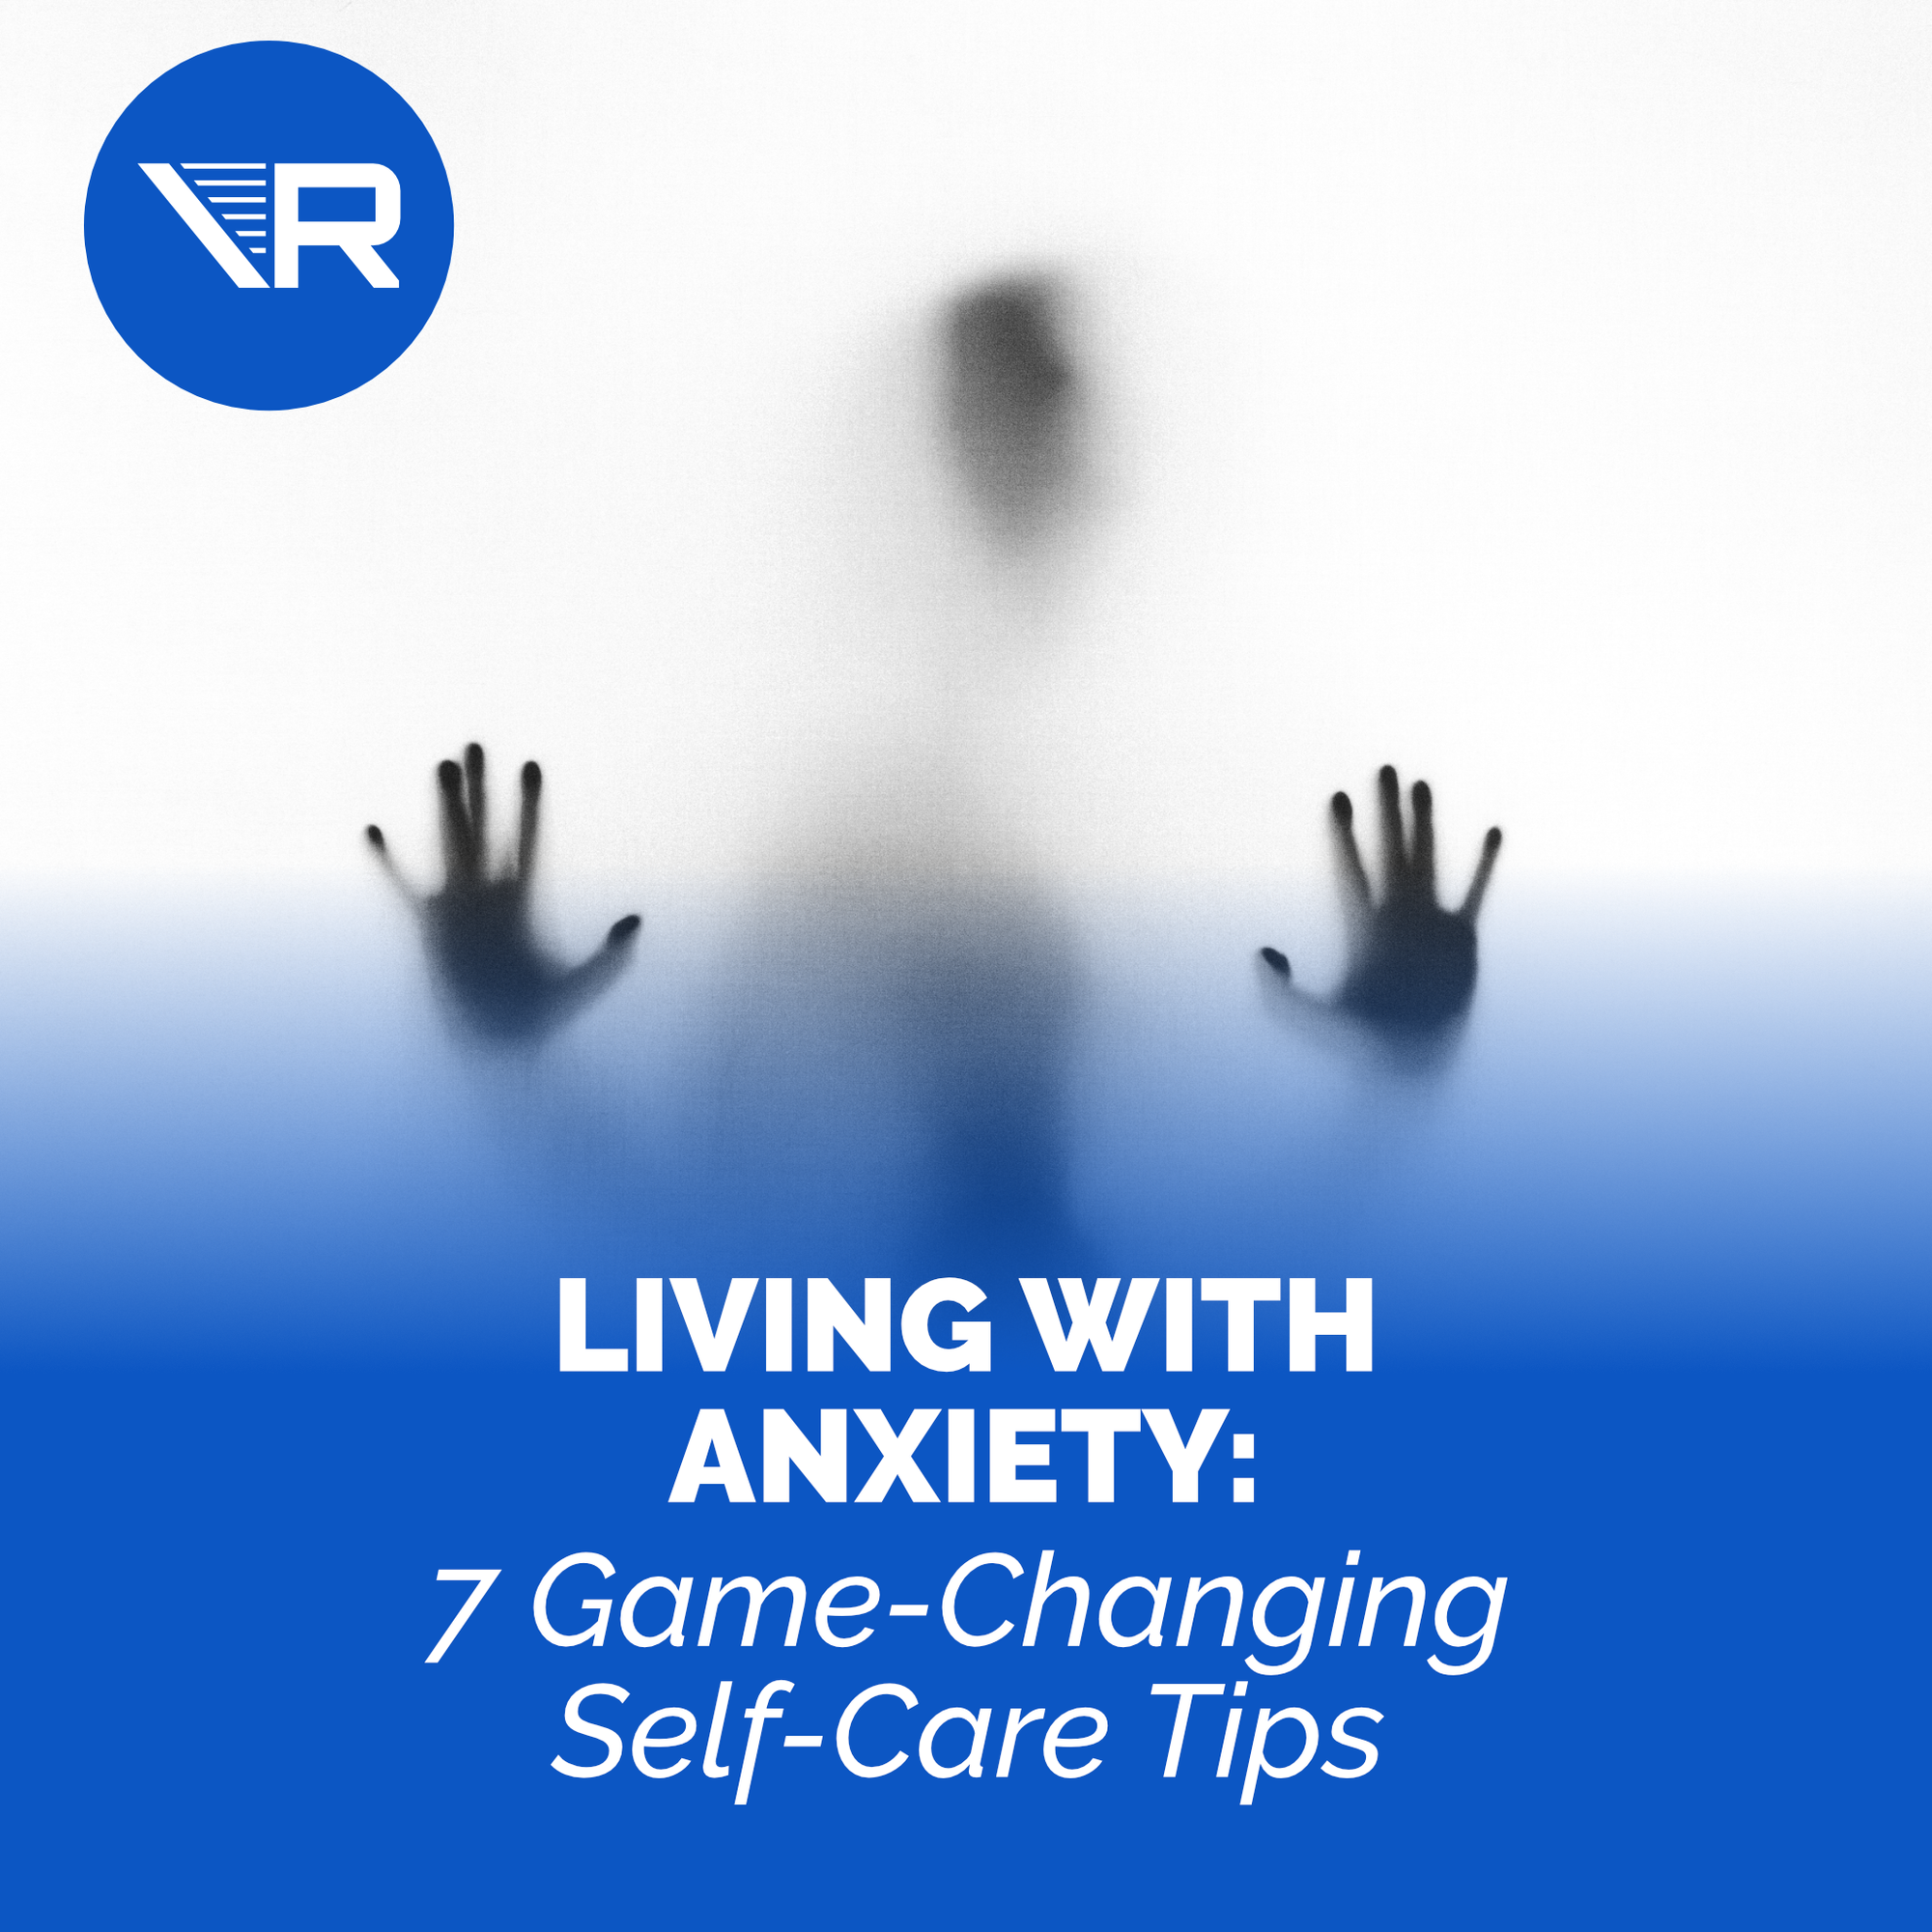 Anxiety management tips